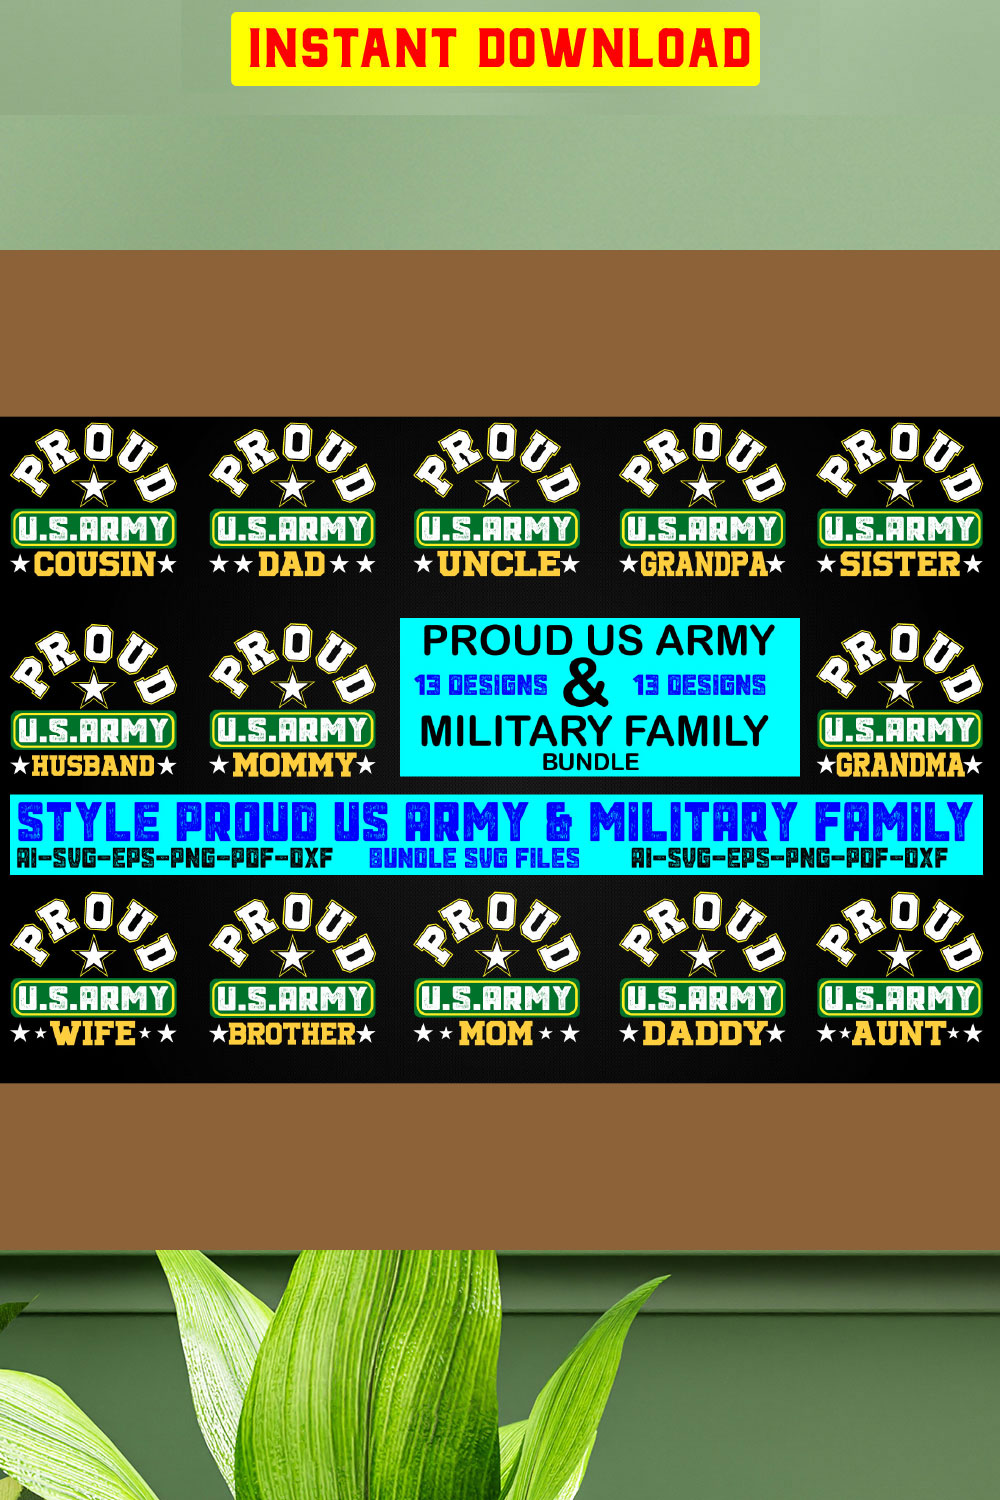 Style Proud US Army & Military Family Bundle SVG Files Vol-01 pinterest preview image.